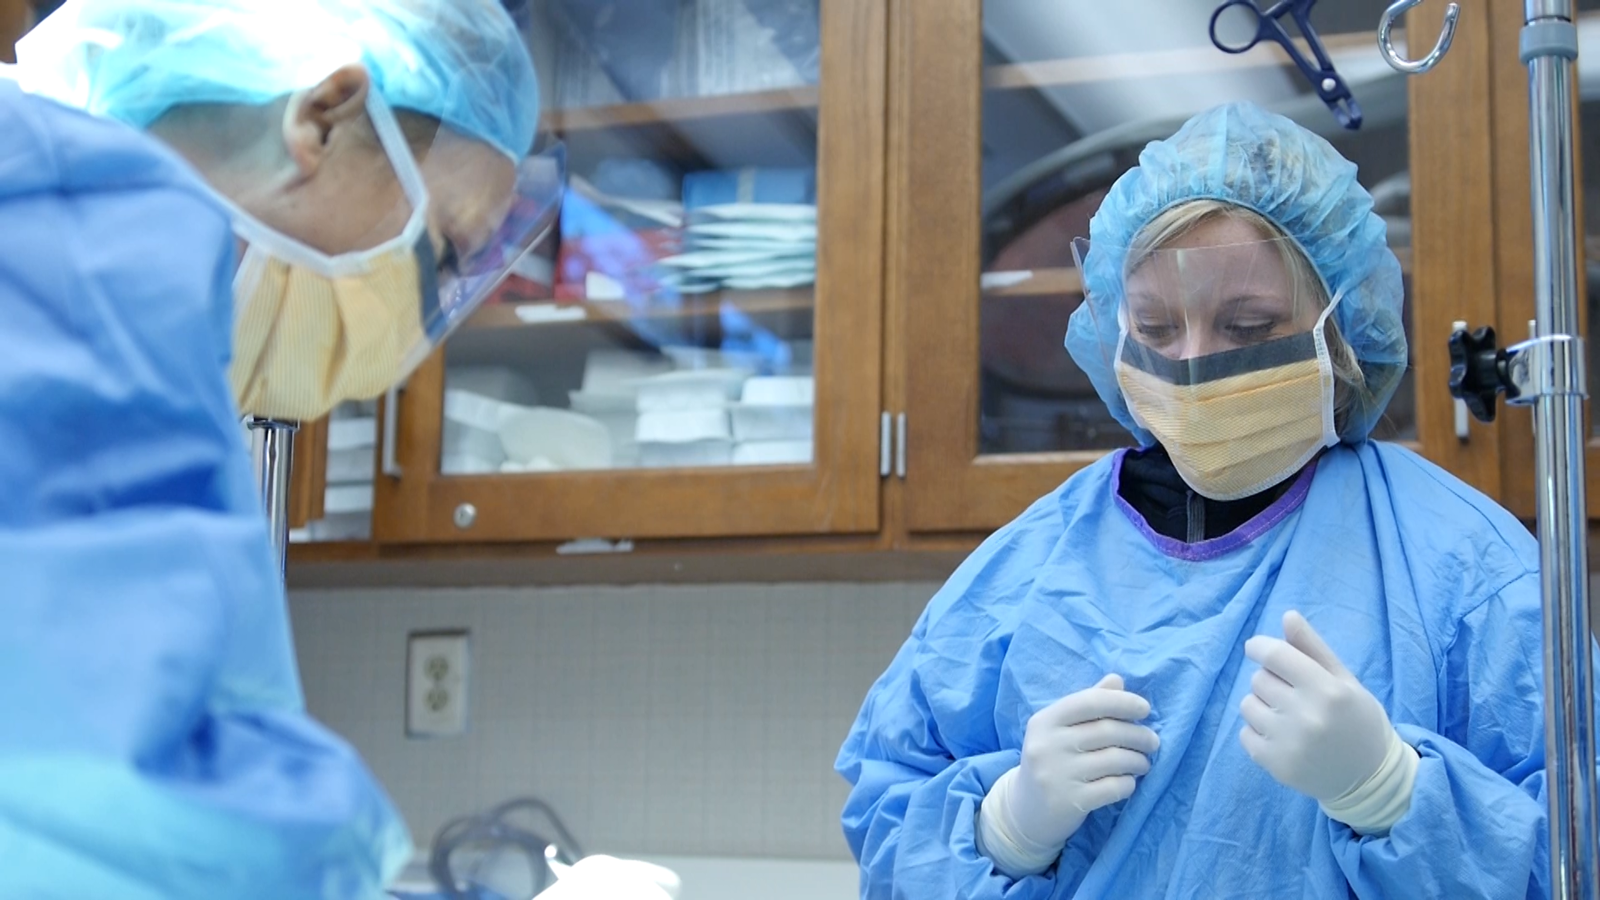 Two students dressed in scrubs and masks practice surgical techniques.